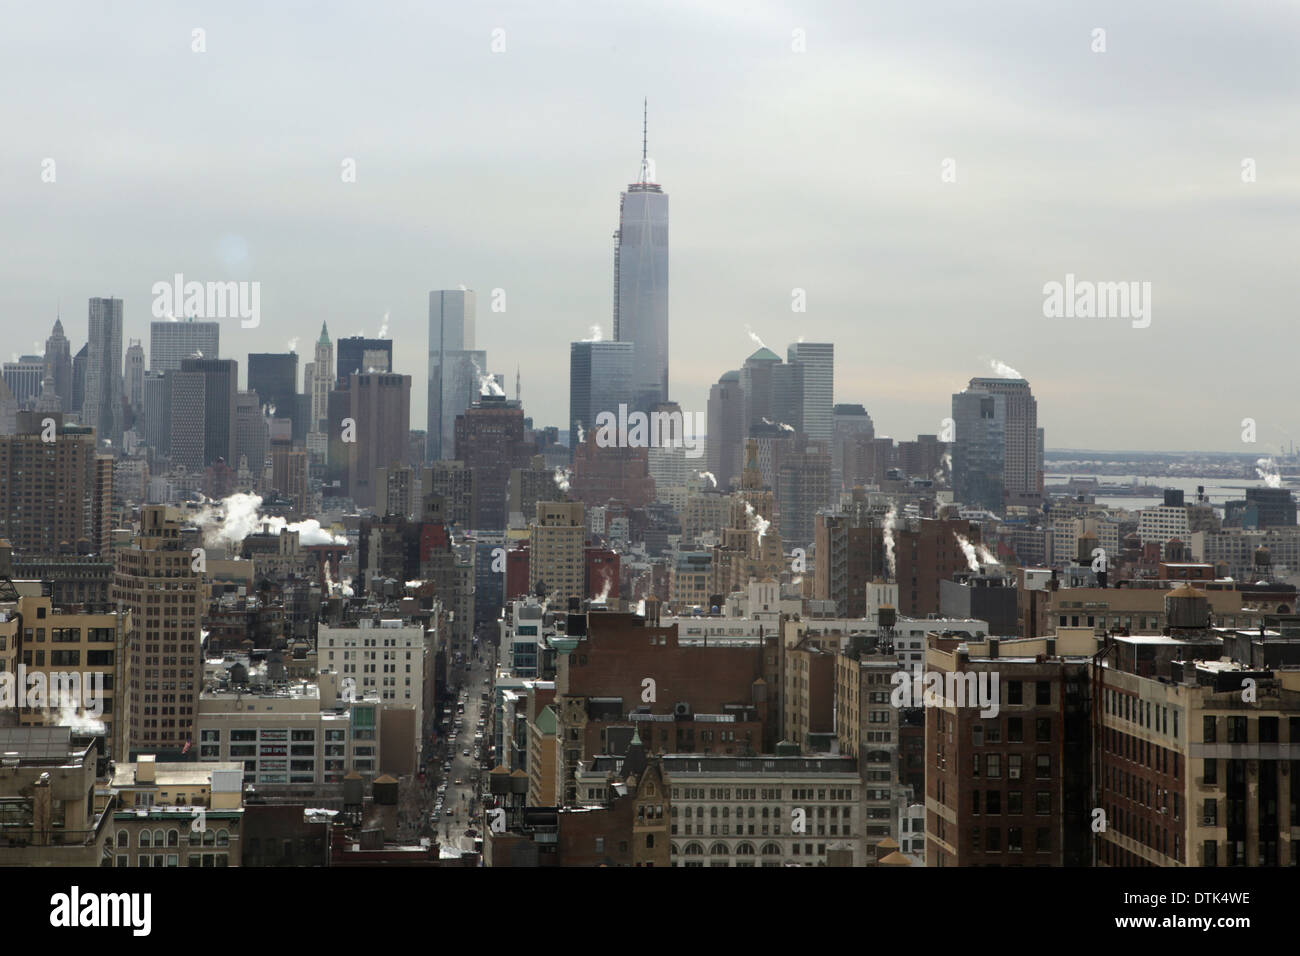 Lower Manhattan skyline including the newly-built One World Trade Center a/k/a Freedom Tower, New York, NY, January 28, 2014 Stock Photo